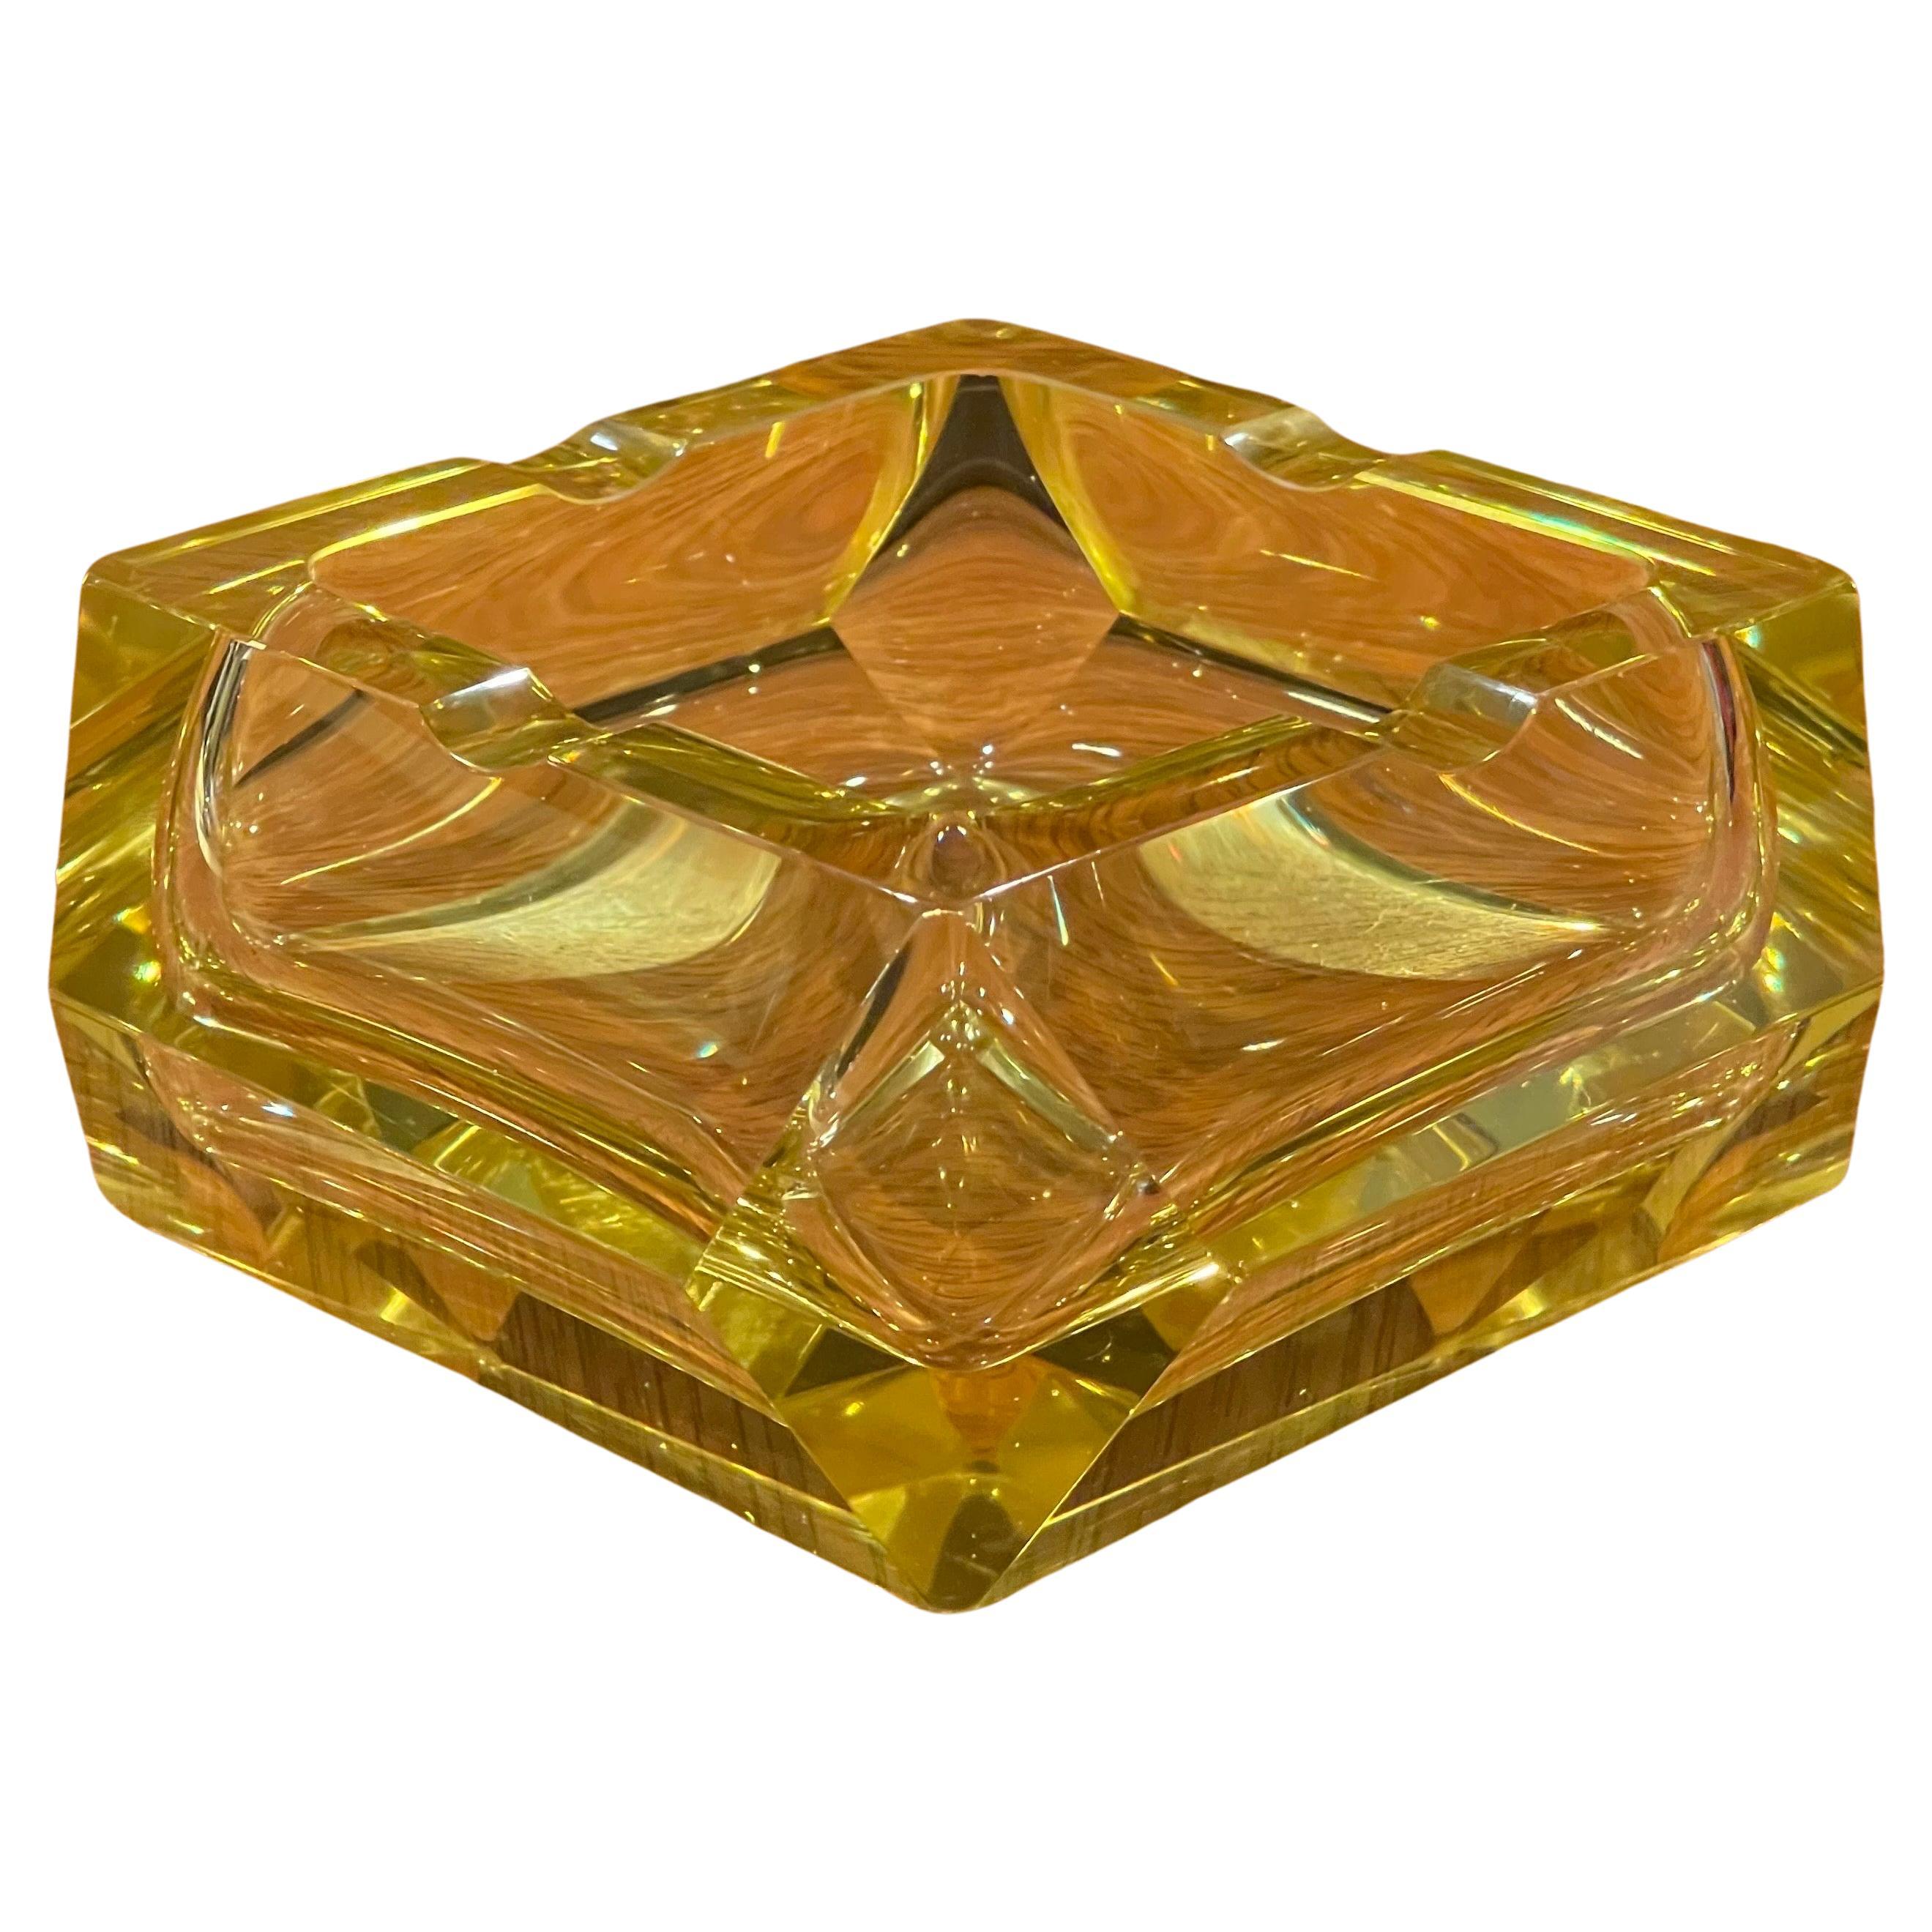 Gorgeous large and heavy yellow crystal ashtray by Moser Glassworks, circa 1960s. The piece is in very good vintage condition with no chips or cracks and measures 5.5